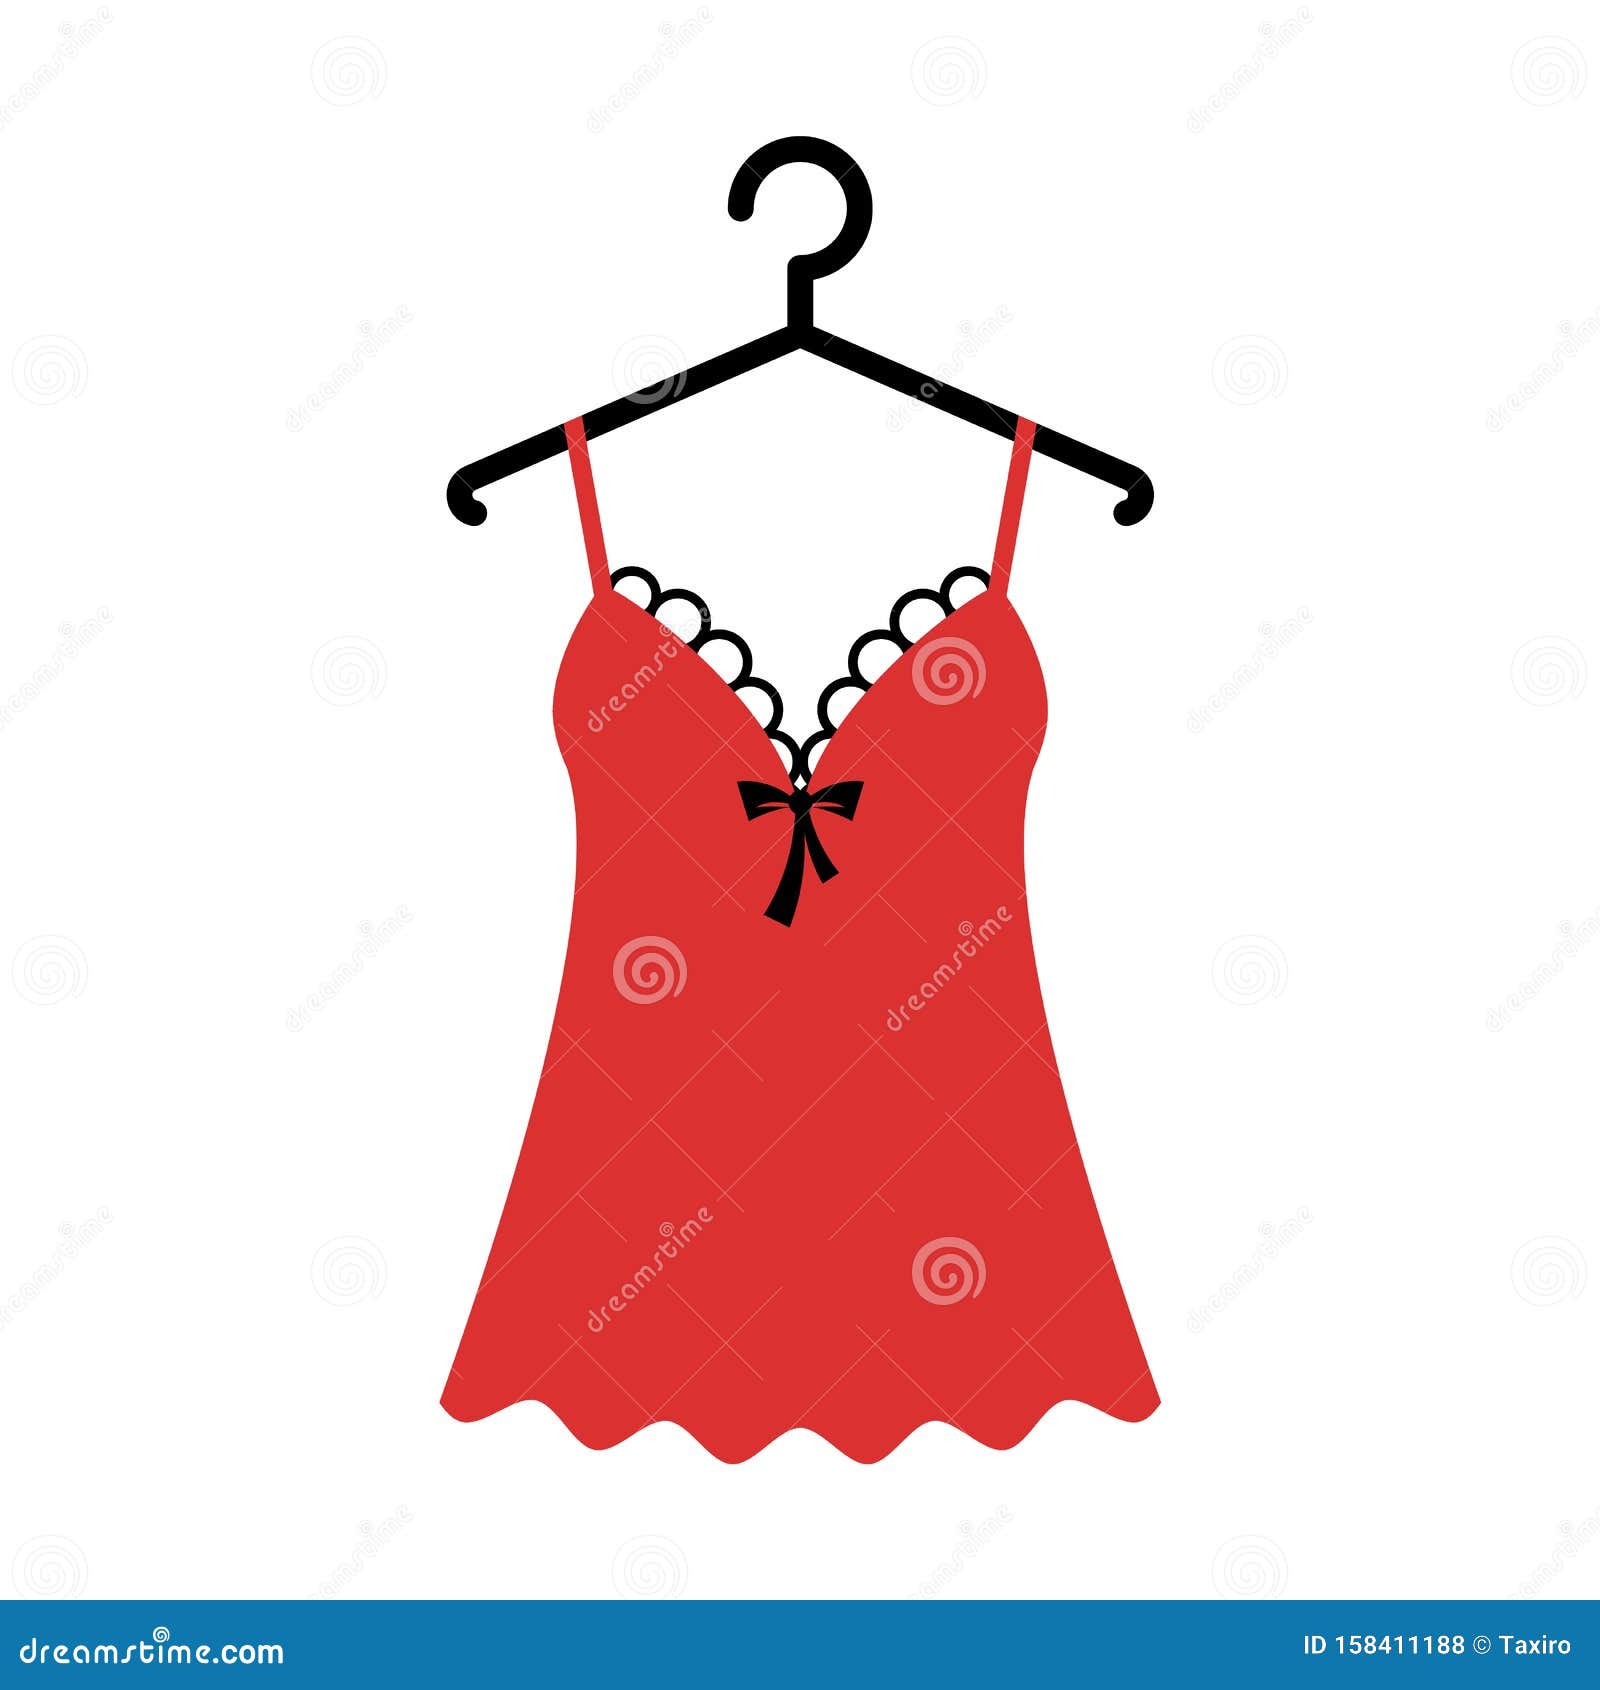 Women Nightgown Lace Stock Vector Illustration Of Style 158411188 